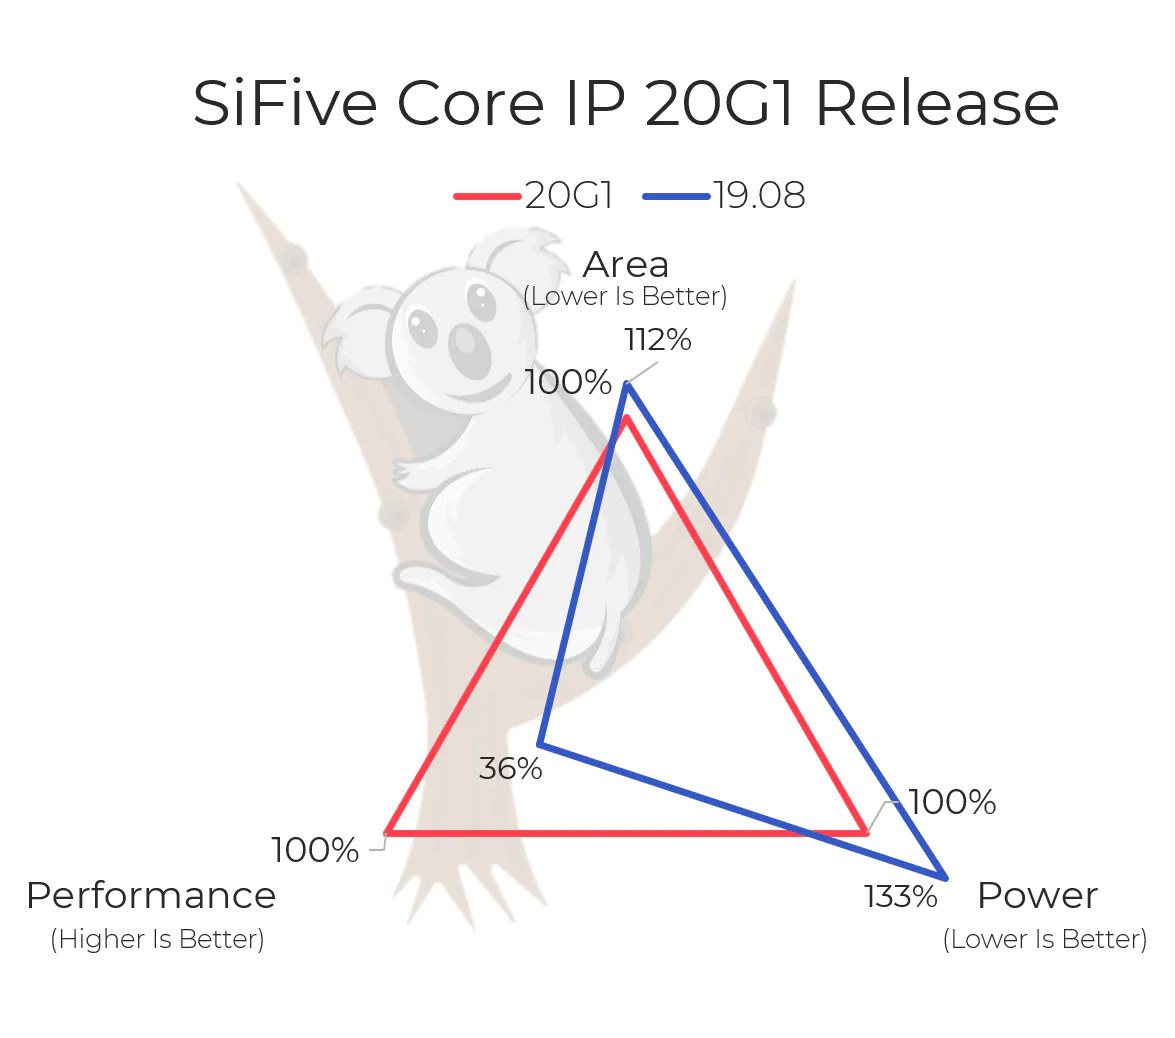 SiFive Core IP 20G1 Release